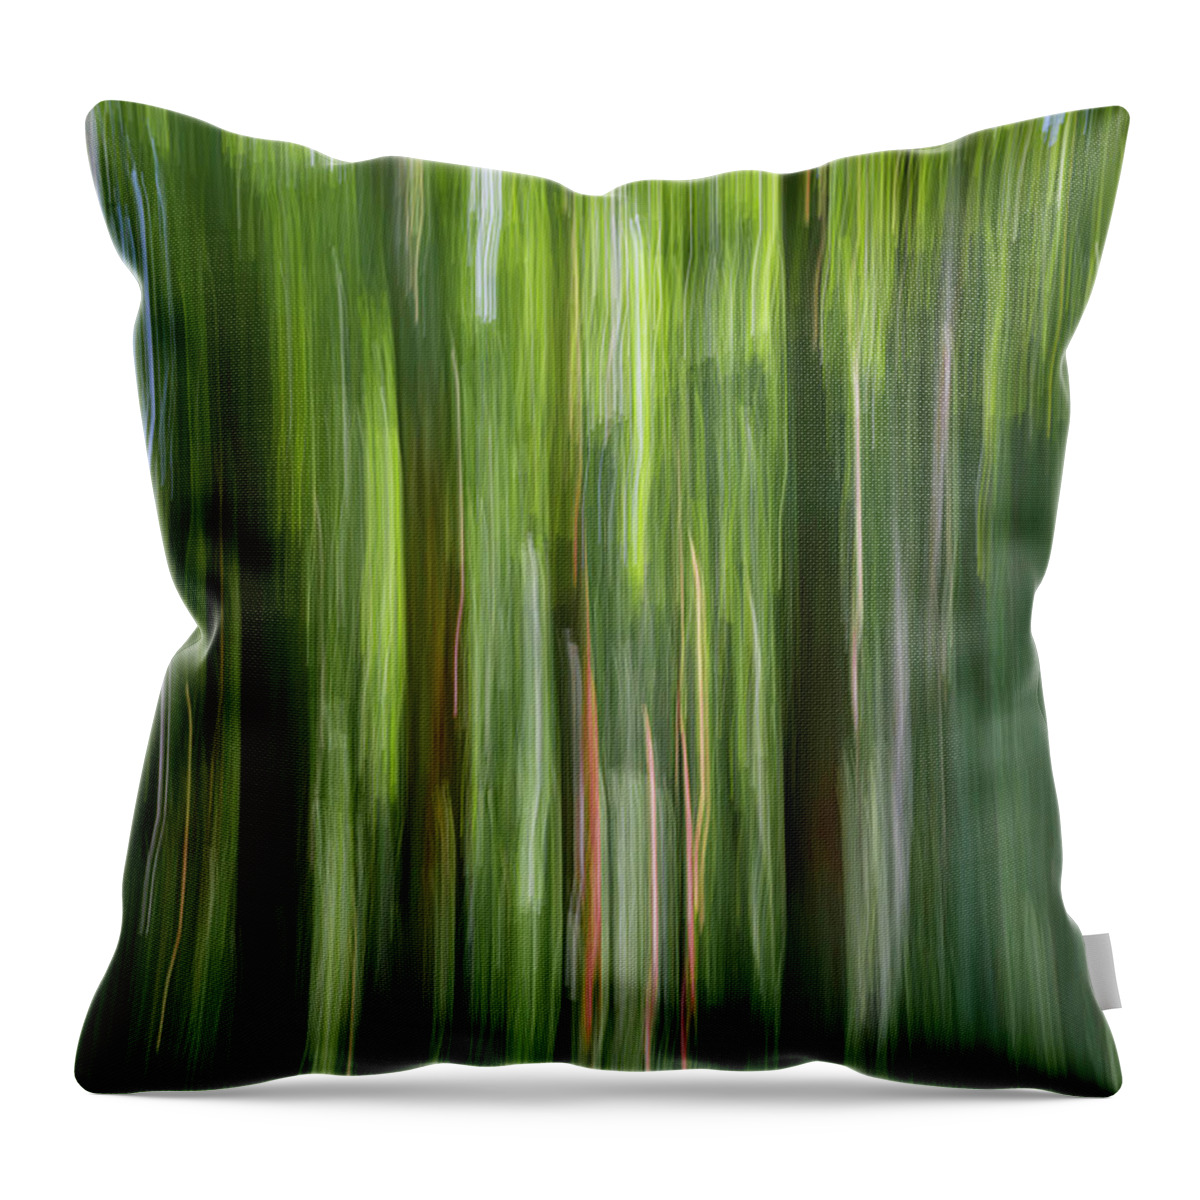 Artistic Throw Pillow featuring the photograph Straight Up by Norman Reid